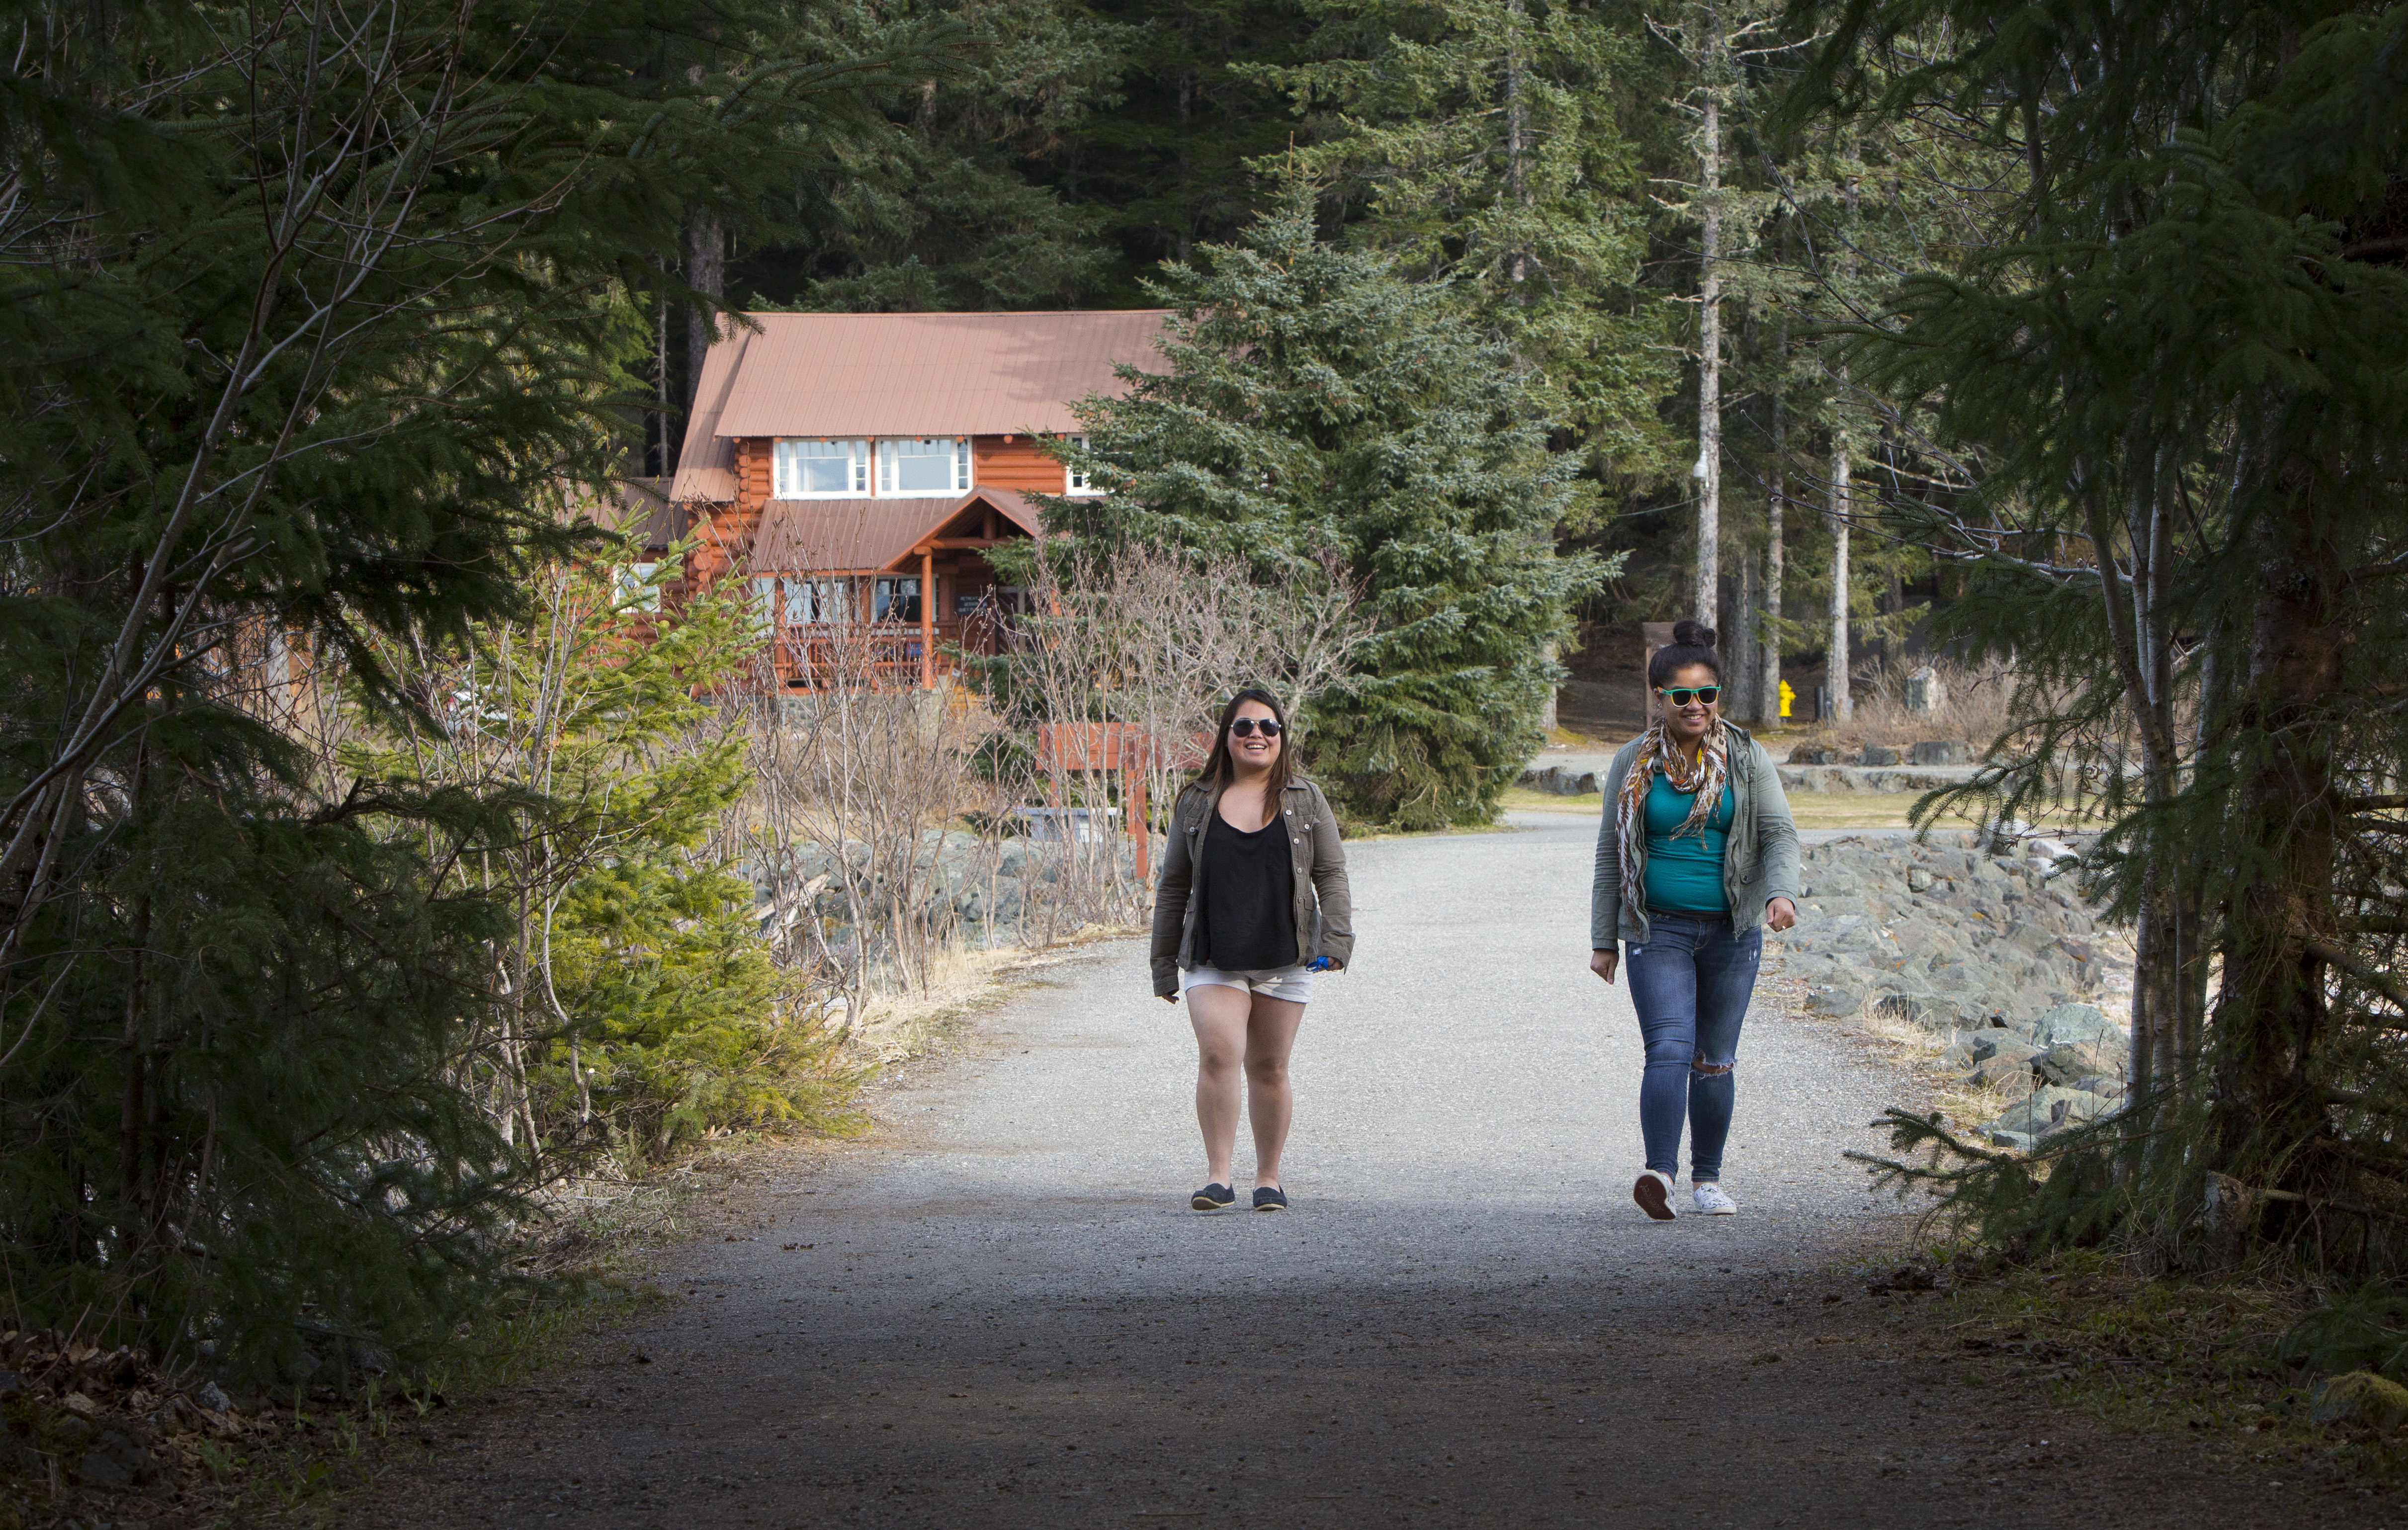 Visitors walk the causeway toward Shrine Island at the Shrine of St. Therese in Juneau, Alaska, in this 2014 photo. The place of retreat with breathtaking views was designated a national shrine by the U.S. bishops Oct. 1. (CNS photo/Nancy Wiechec)